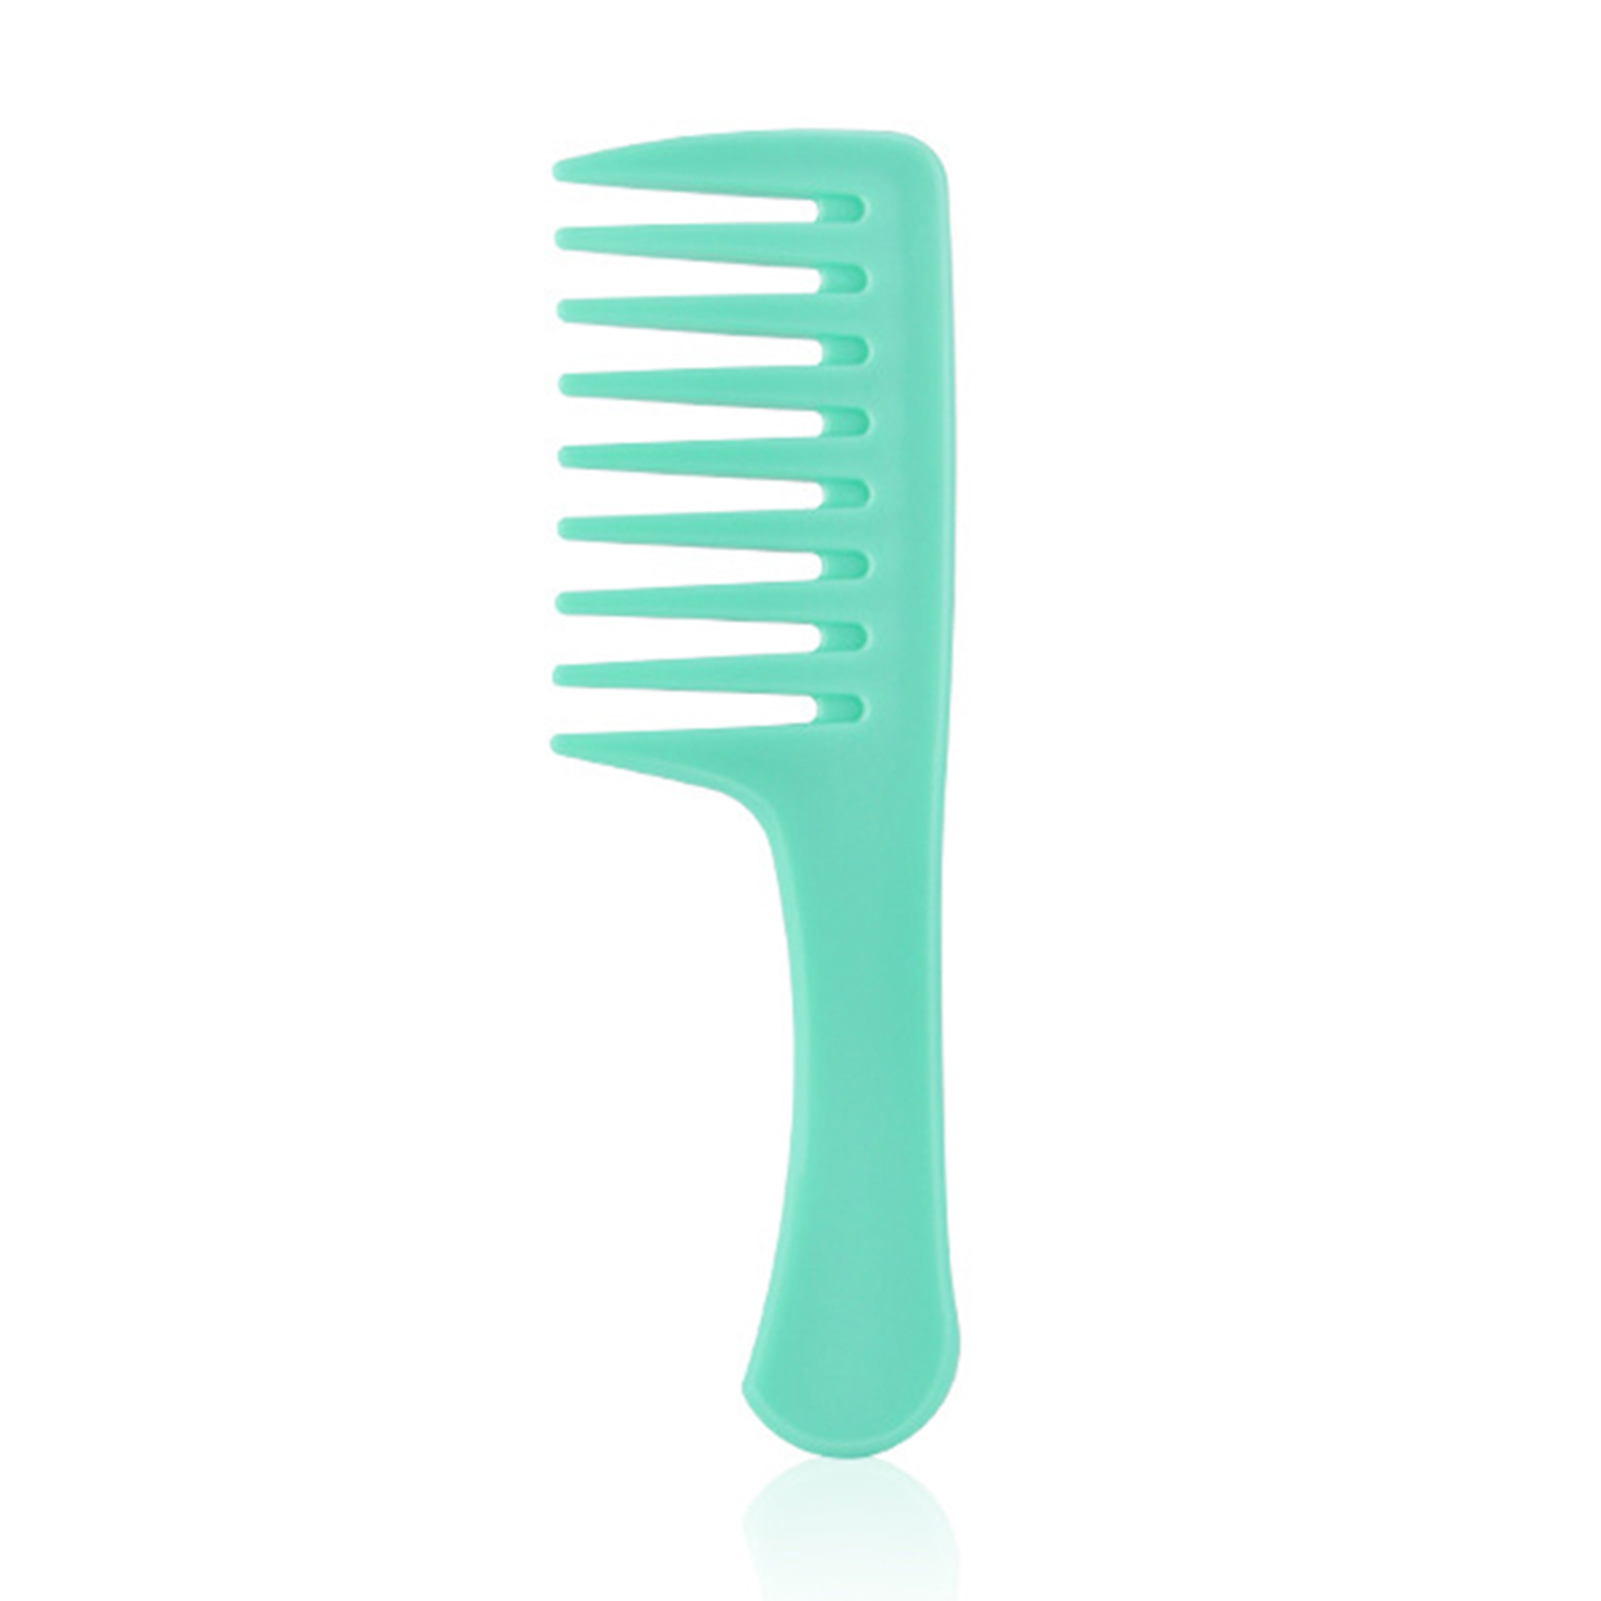 Shun Hair Comb Plastic Household Candy Color Big Tooth Comb Green Wide Tooth Comb Durable Detangling Hair Brush Professional Handgrip Comb for Curly Hair Long Hair Wet Hair New - image 1 of 2